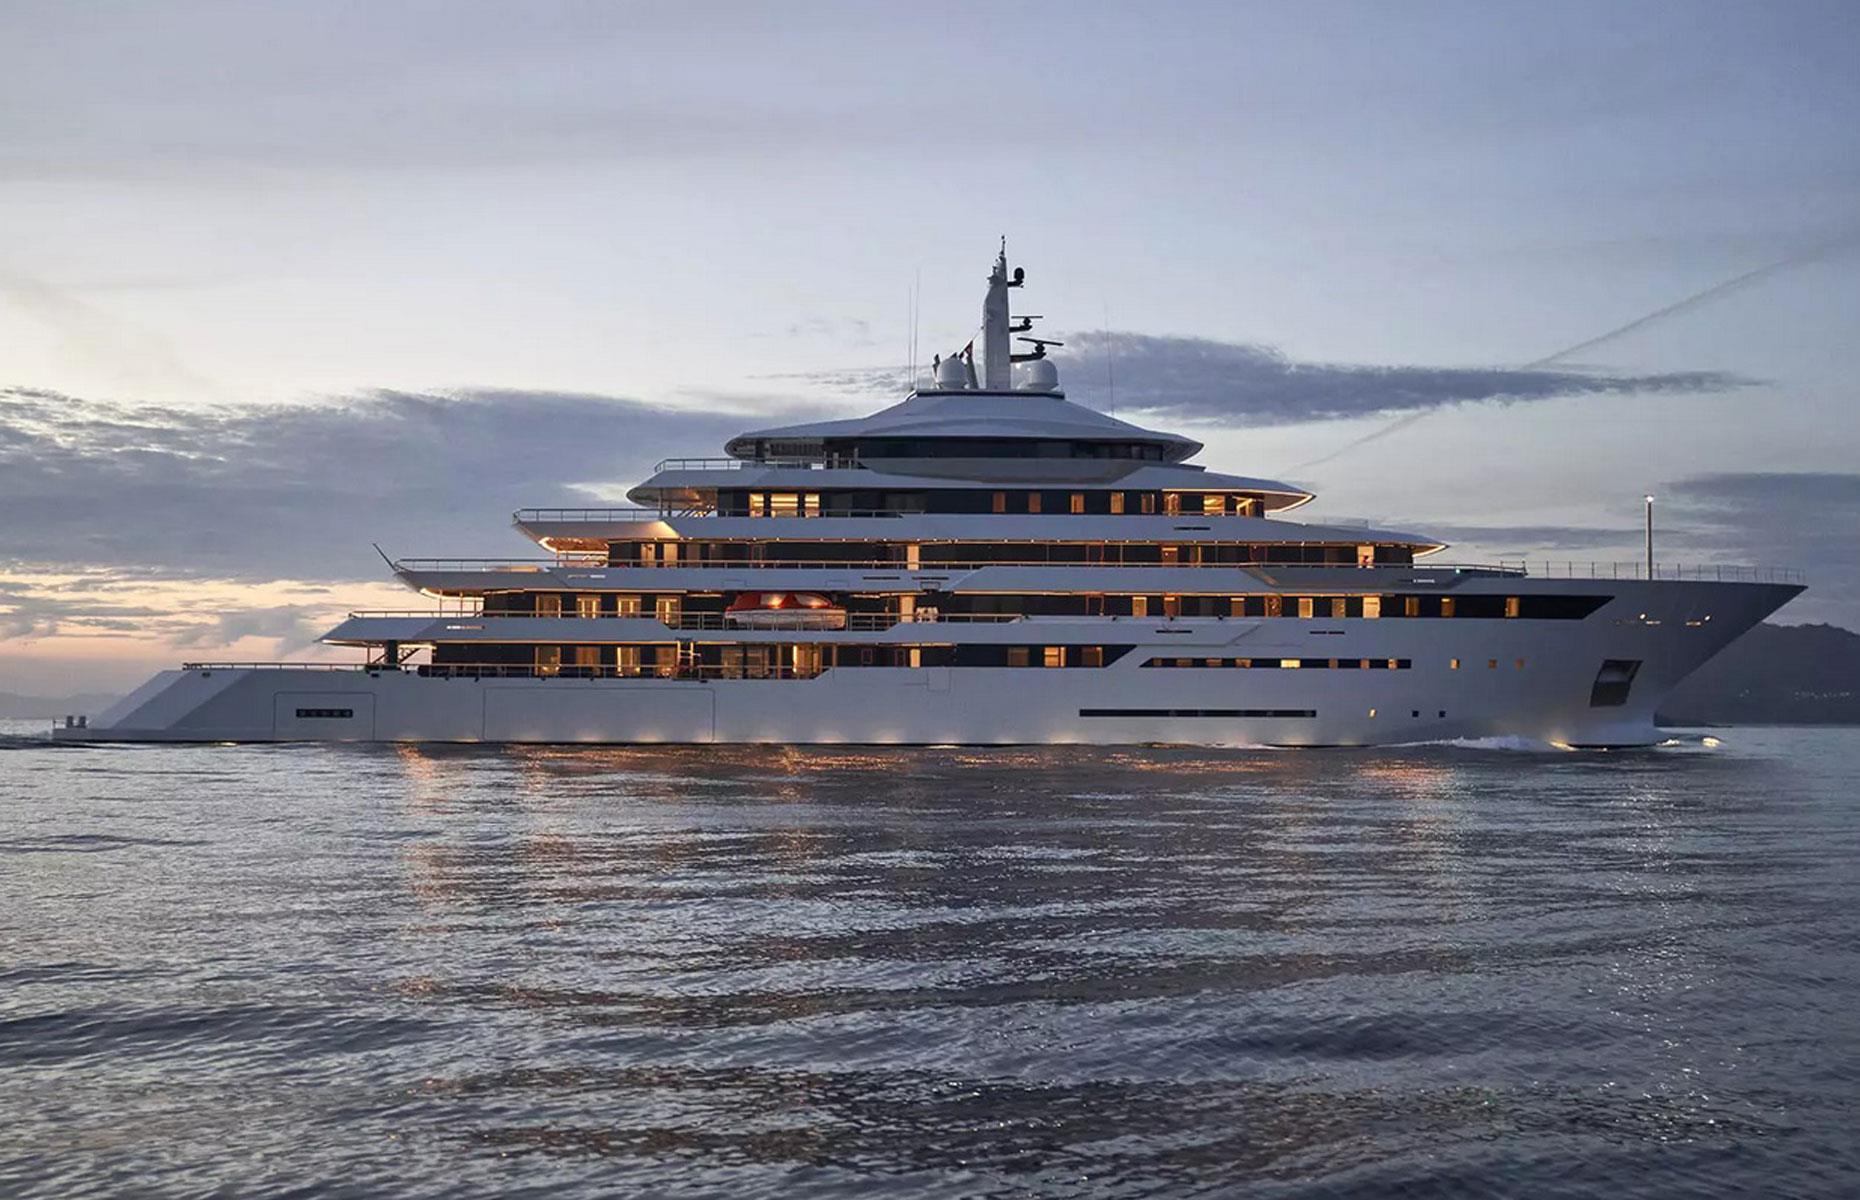 <p>Hot on the heels of delivering the 367-foot (112m) <em>Renaissance (NB-724)</em>, the largest ever yacht crafted in Spain (and shown here in all its glory), Freire's Galician shipyard is set to complete another whopper:<em> 105 Explorer (NB-729)</em>, which comes in at 344 feet (105m).</p>  <p><em>Renaissance</em> has been described by Burgess Yachts as a "temple of leisure" and "sanctum of tranquillity". But <em>105 Explorer (NB-729) </em>is more about adventure than relaxation...</p>